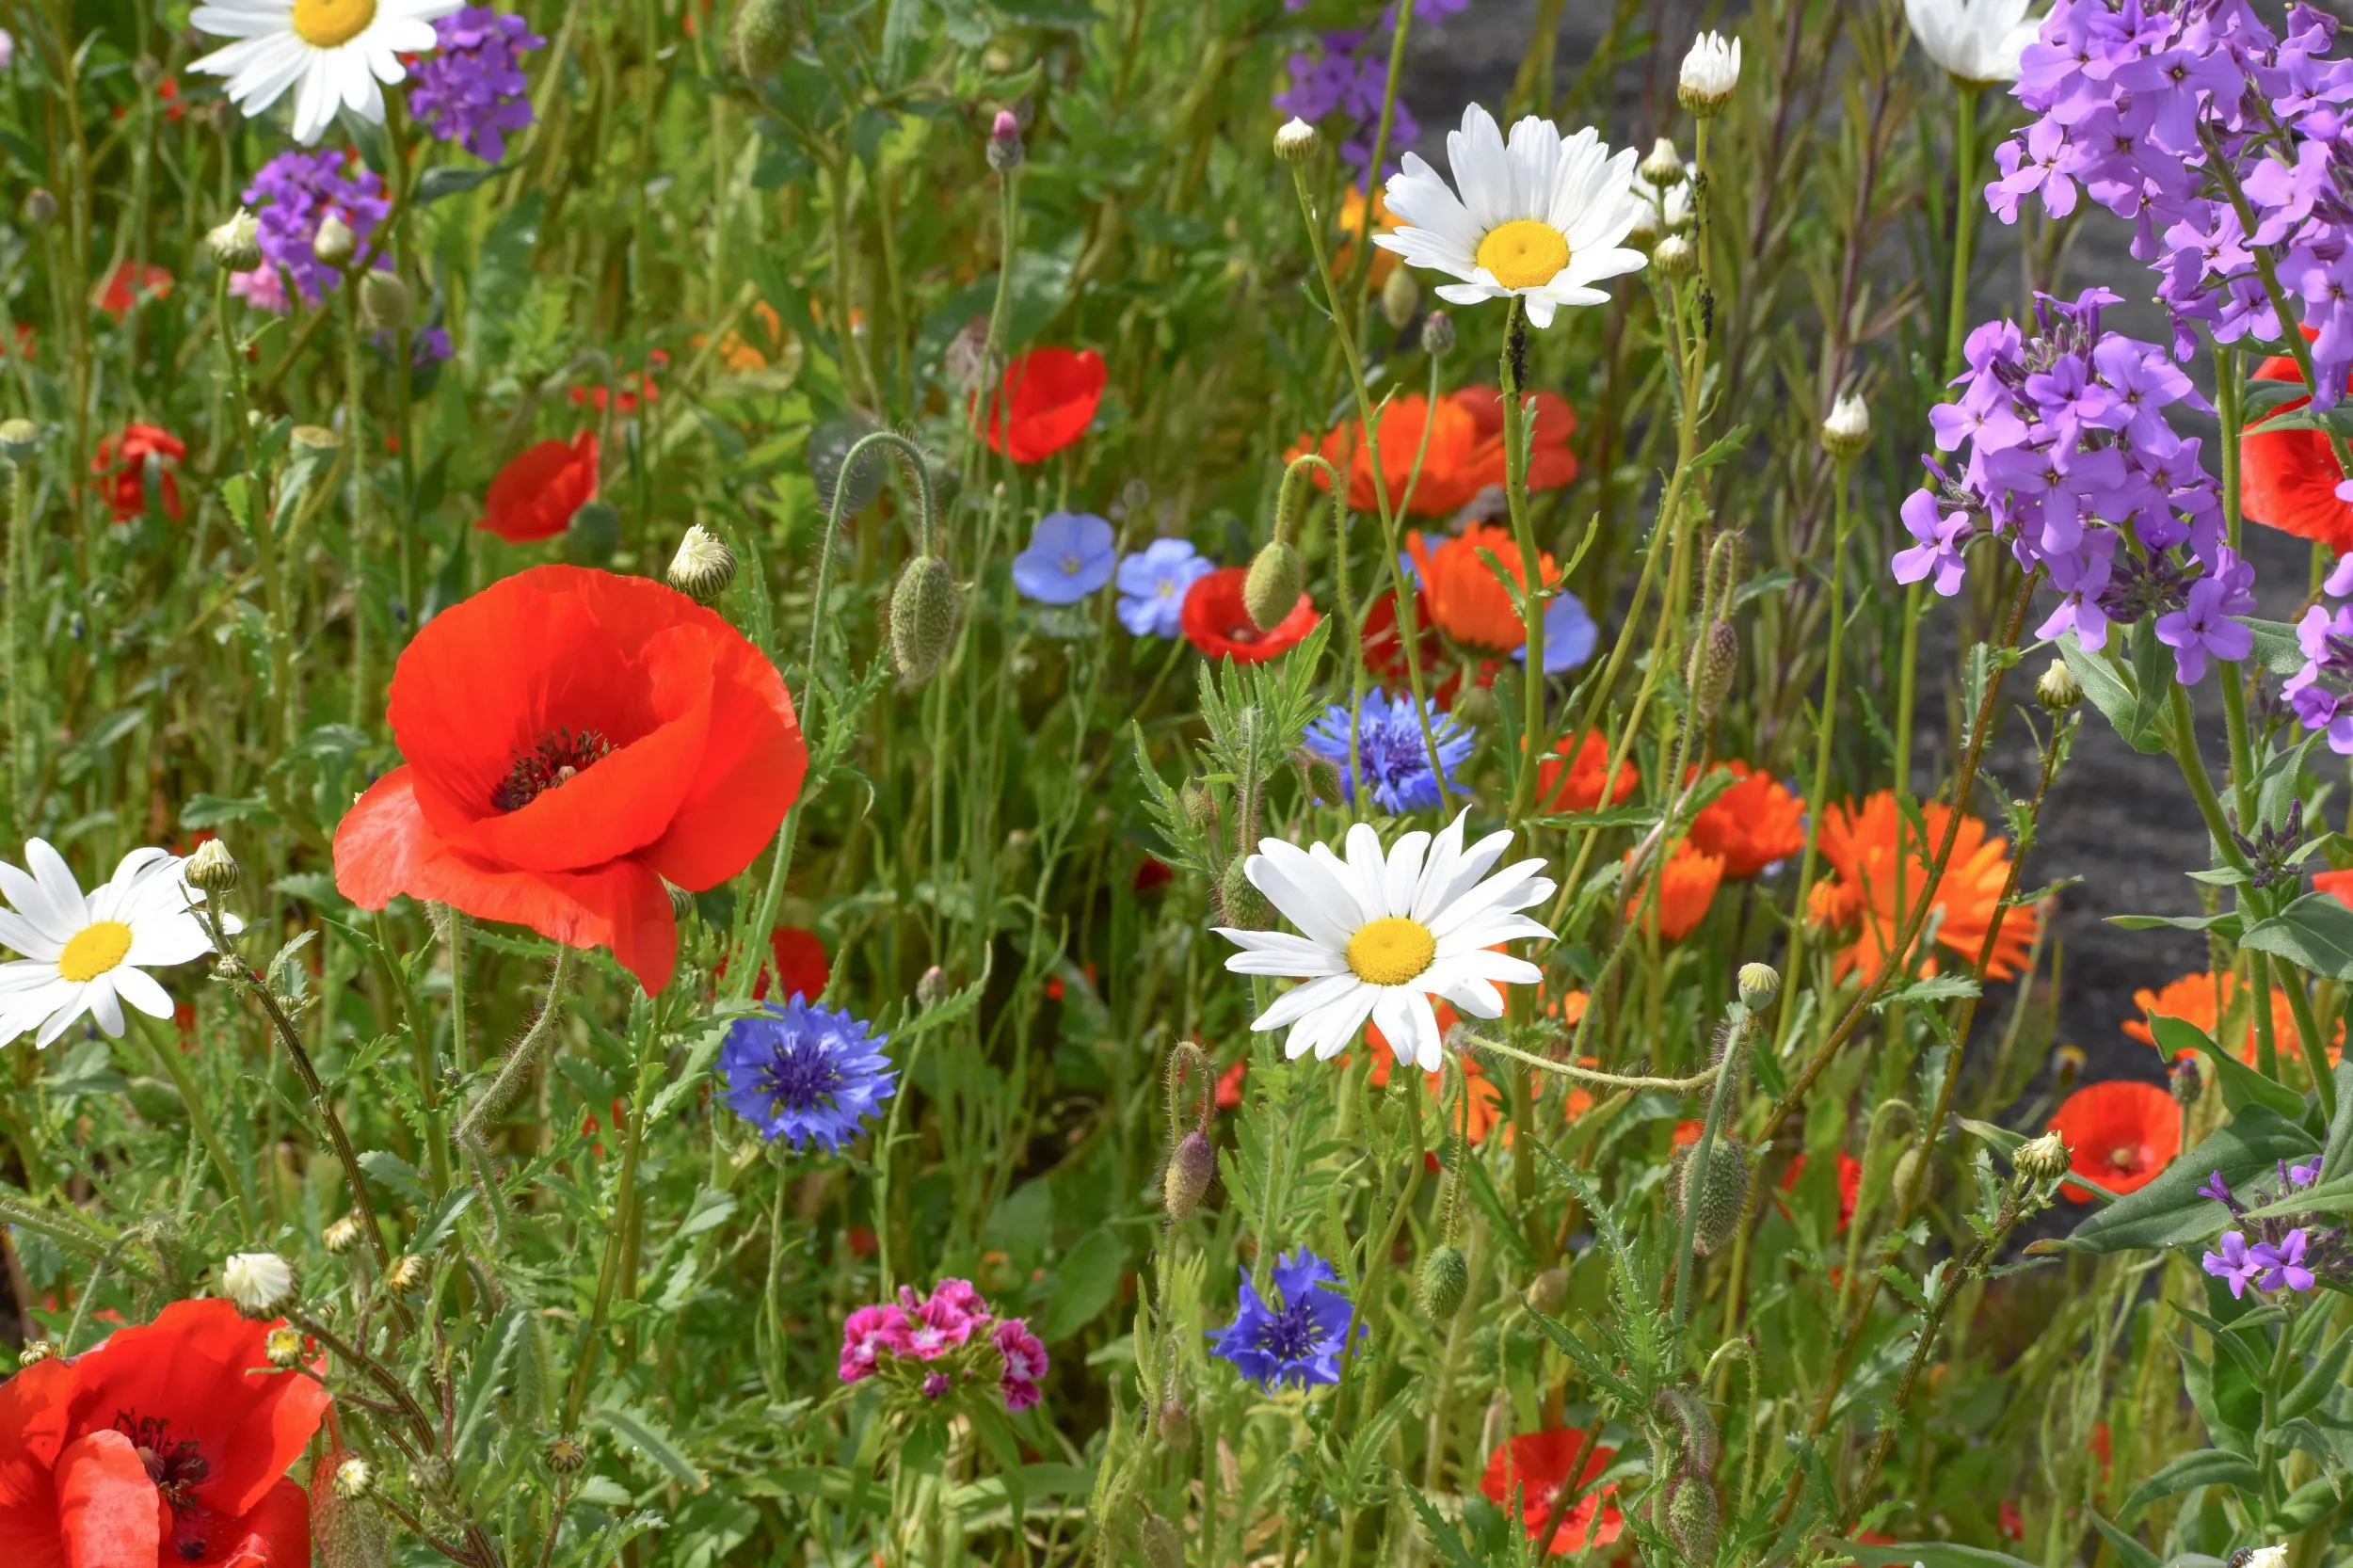 A patch of grass with blooming red poppies, daisies, cornflowers and more.